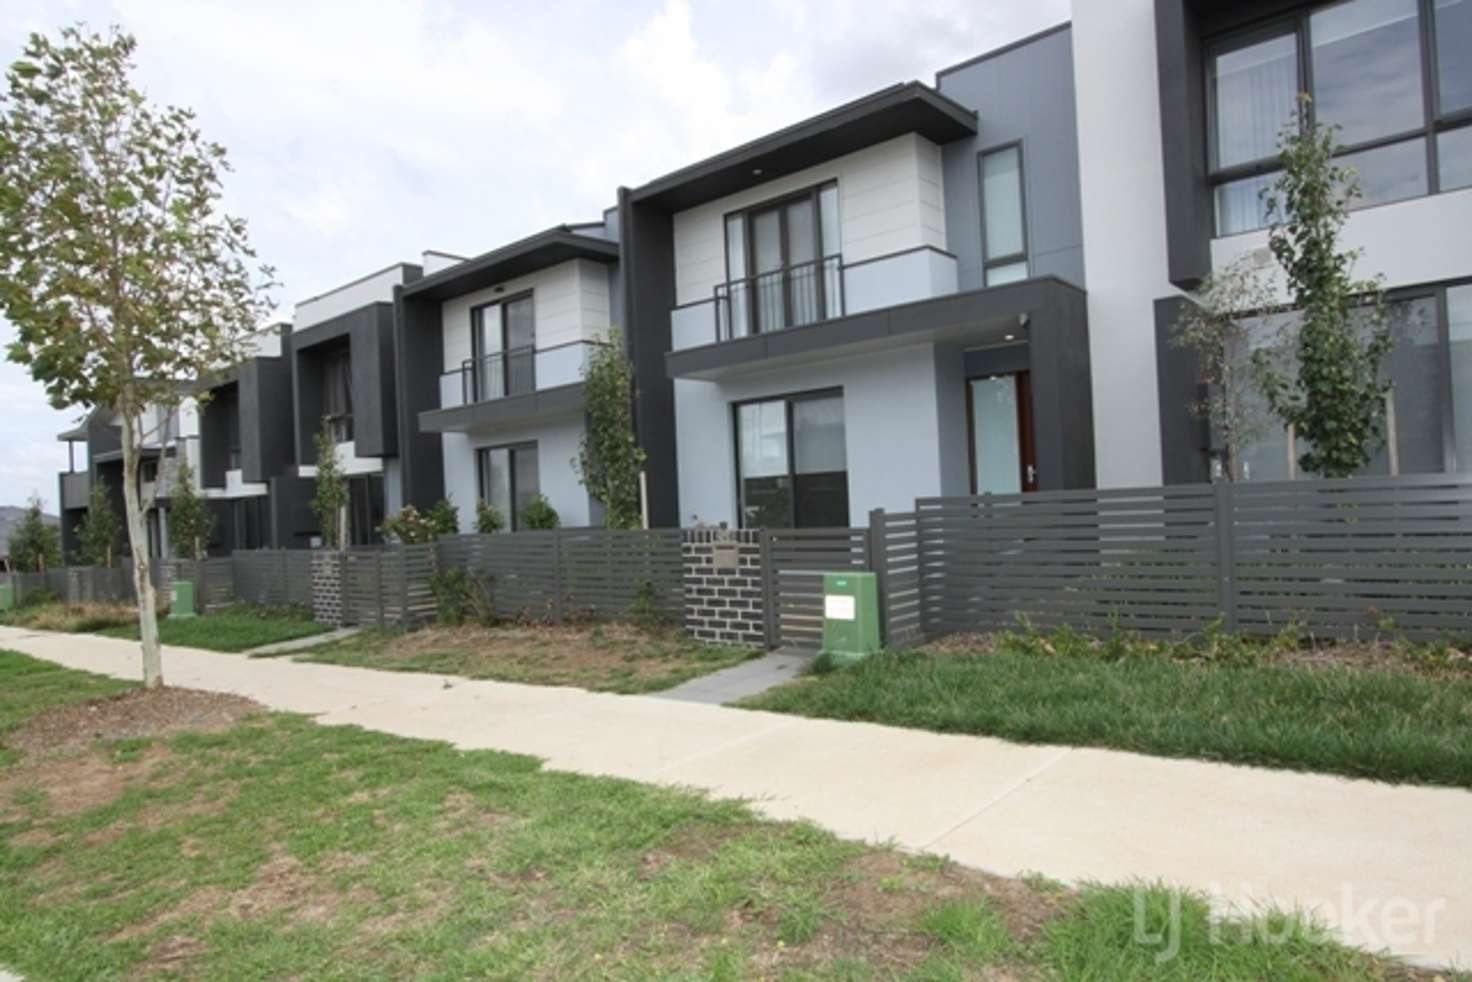 Main view of Homely townhouse listing, 268 Gorman Drive, Googong NSW 2620